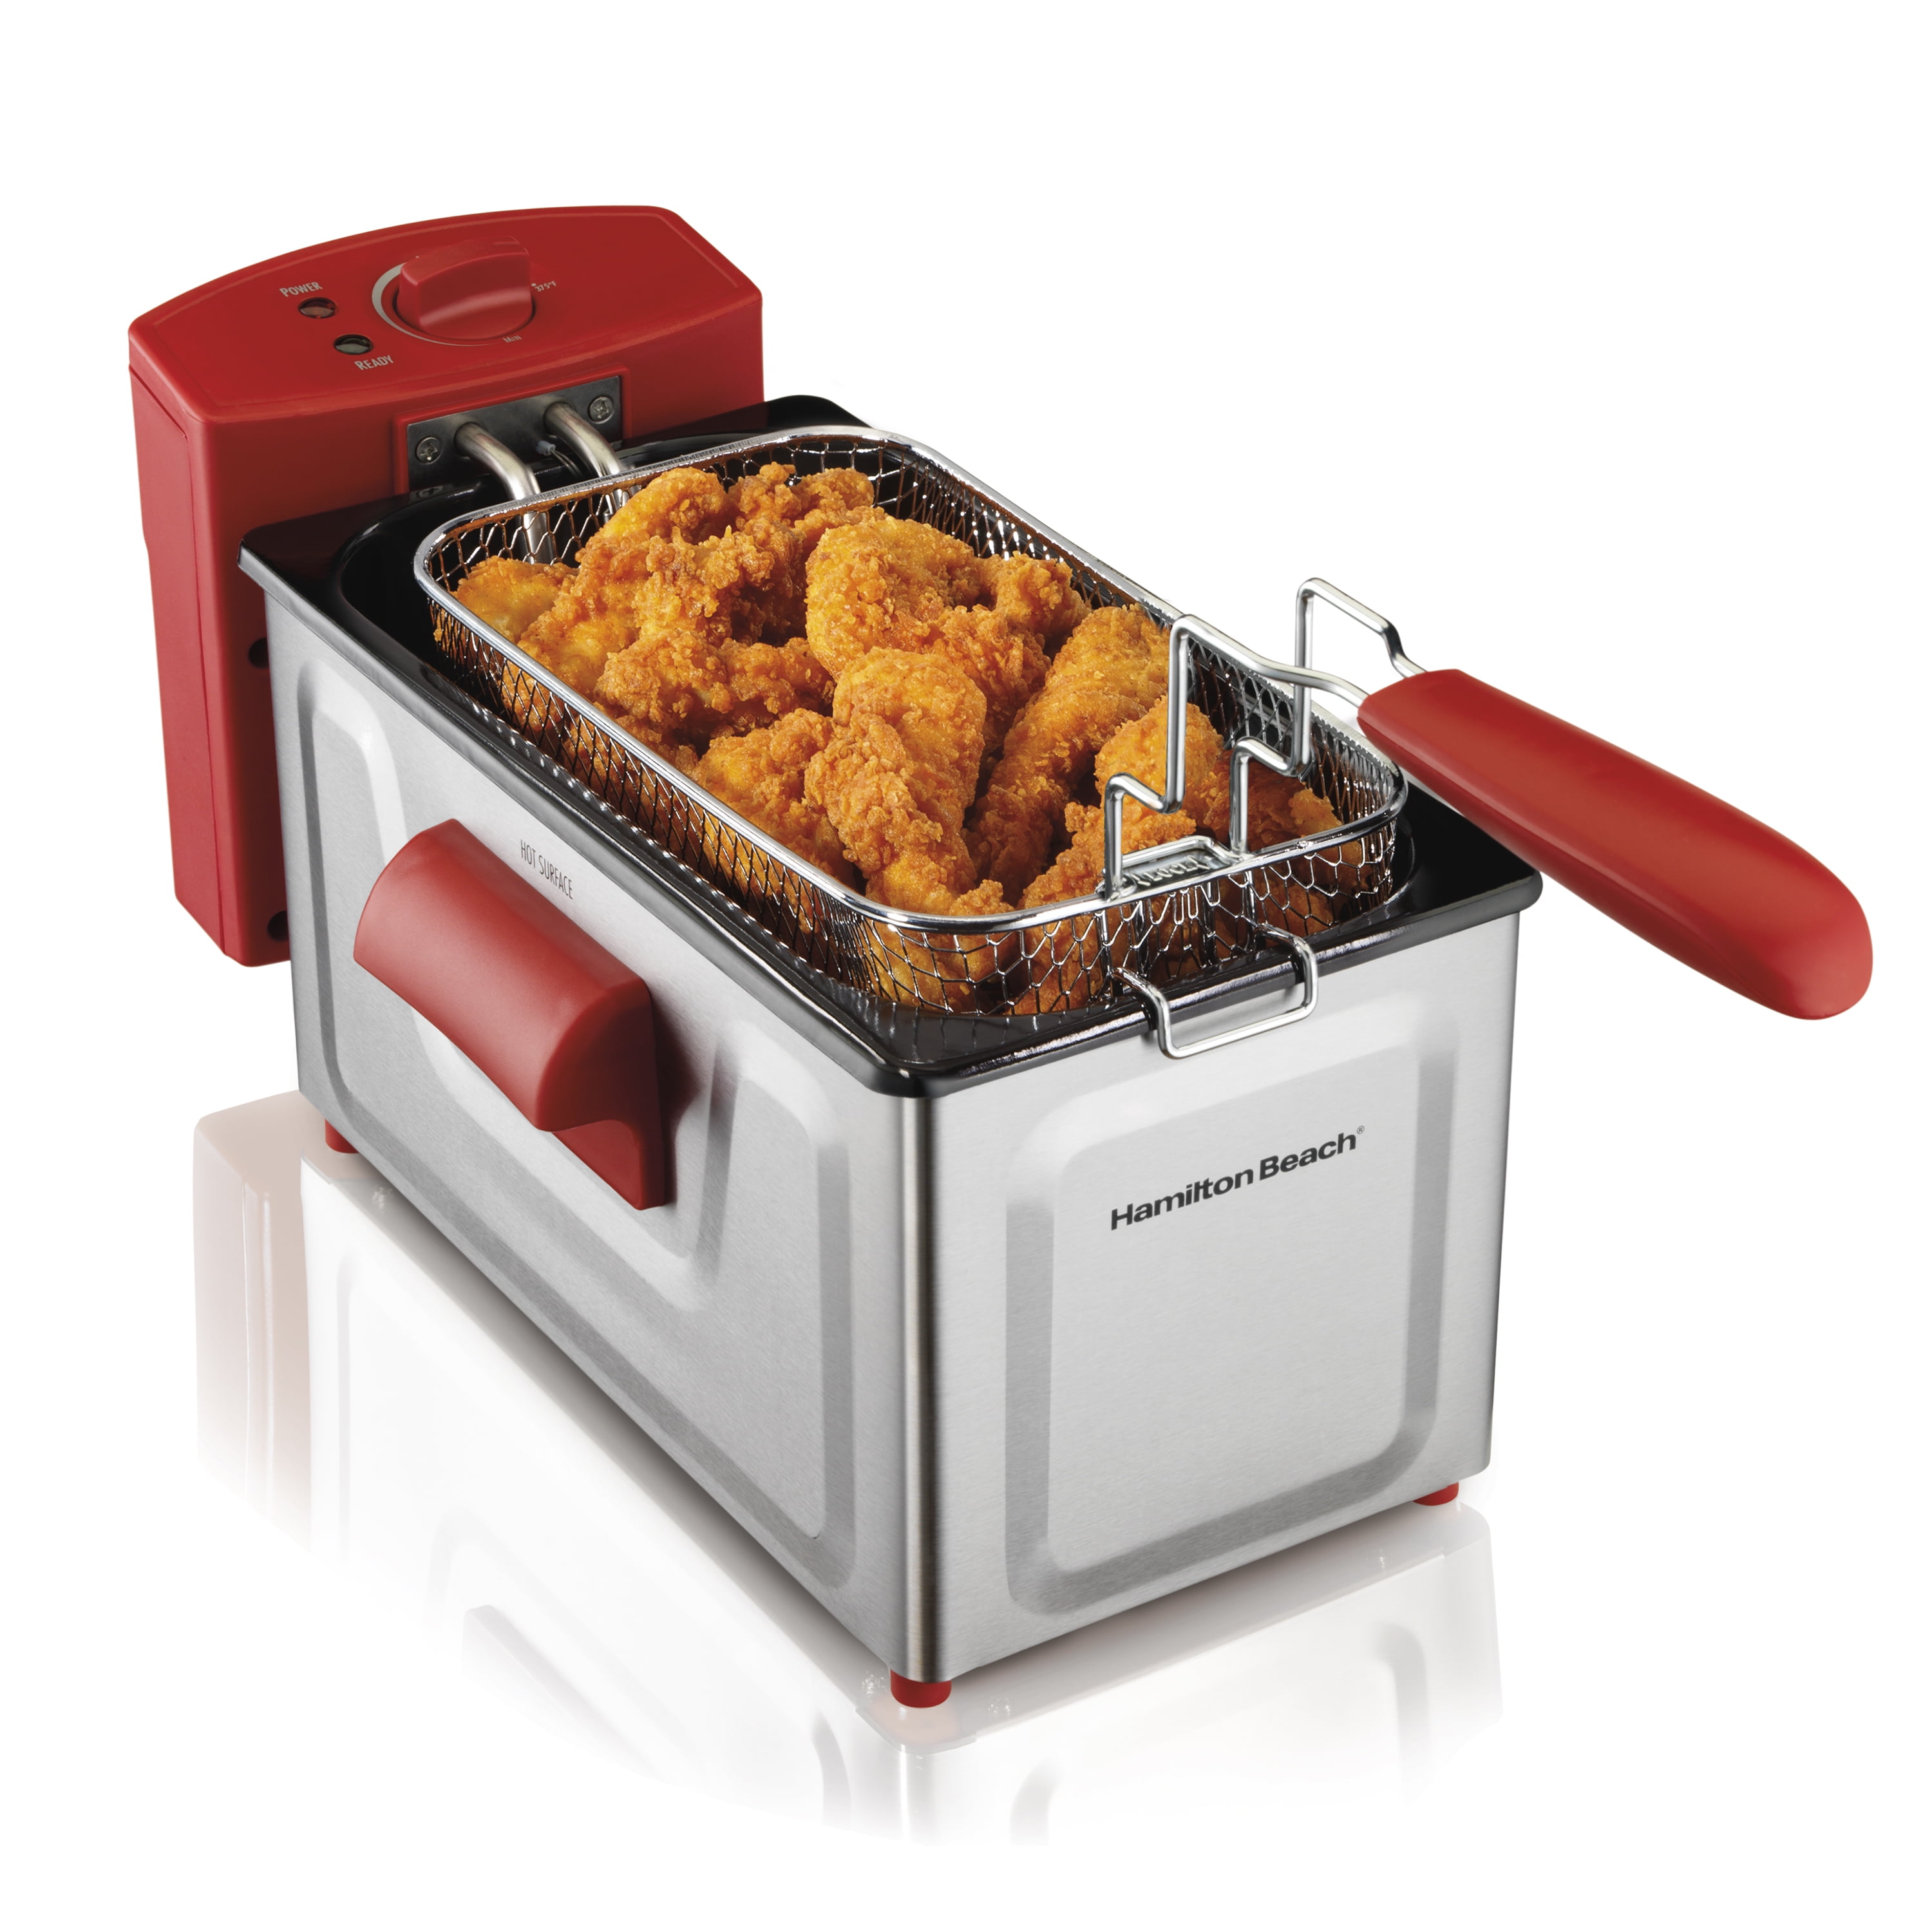 The highly-rated Hamilton Beach 2-Liter Pro Deep Fryer is down to